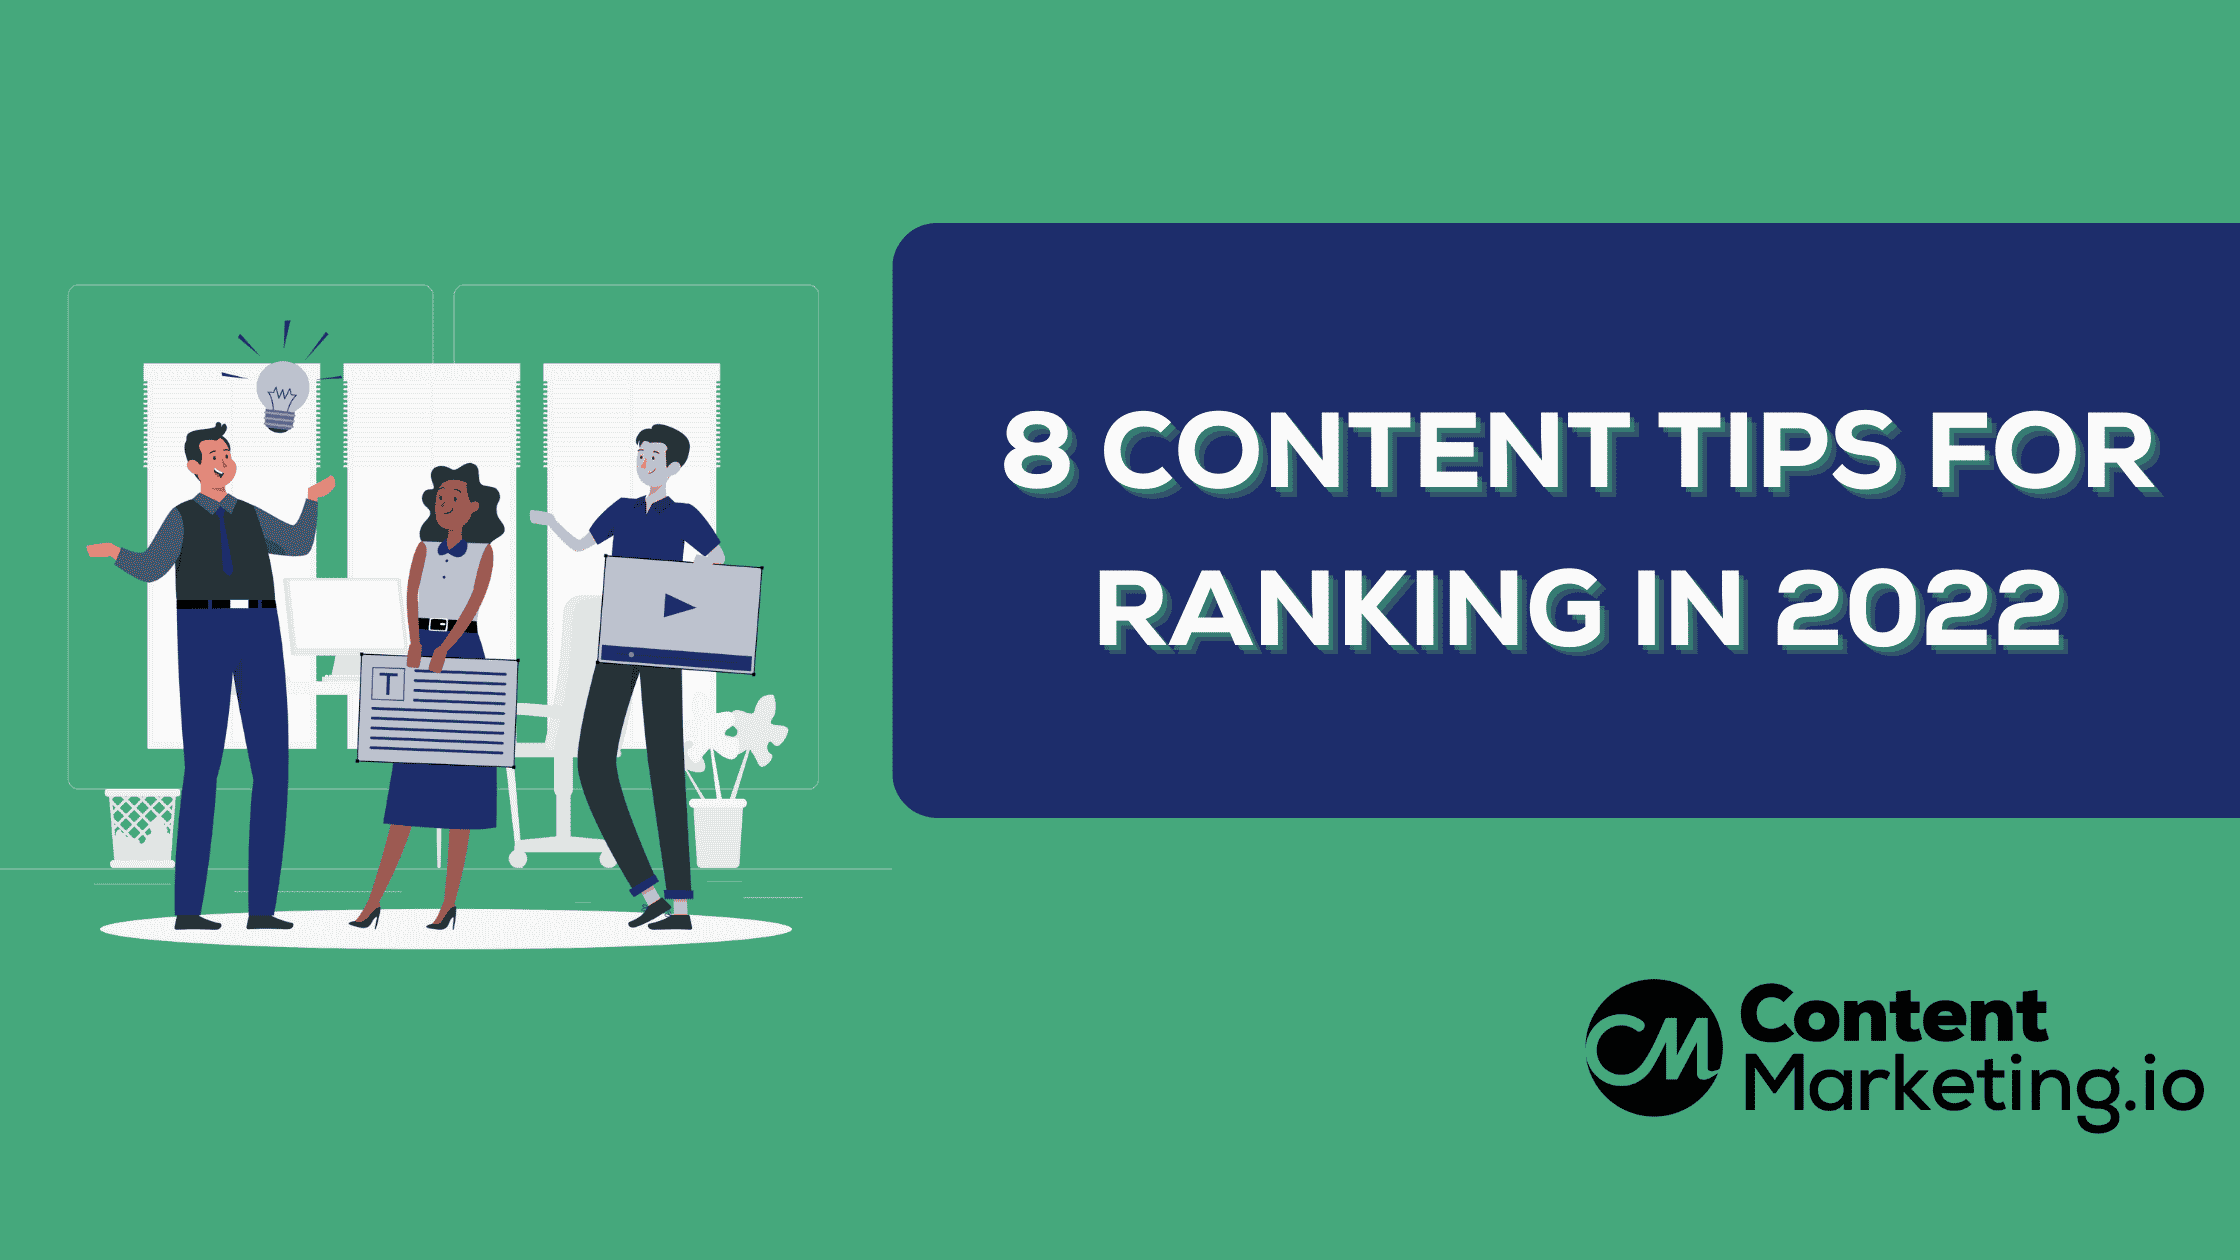 Content Tips for Ranking